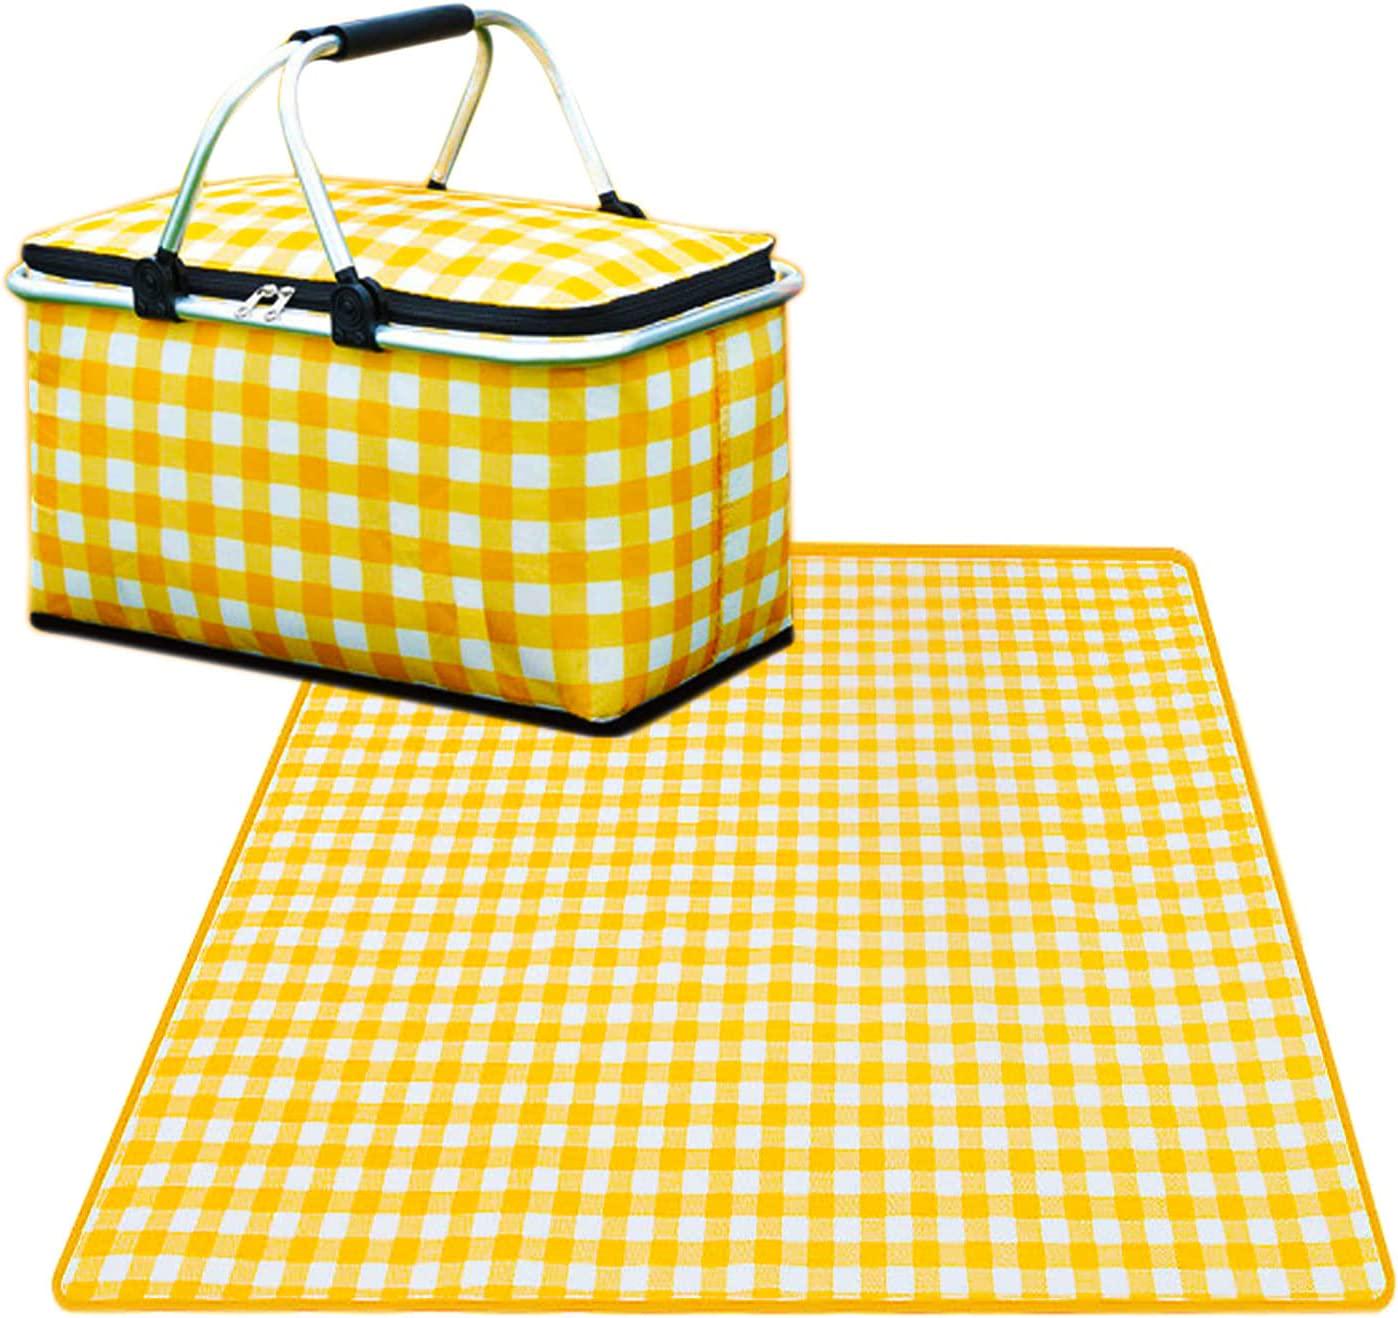 EZUNSTUCK Insulated Picnic Basket + Blanket Set for Family, 30L Large Capacity, Four Layers of Insulation, 2x2m Mat, Accommodates 4-8 People-